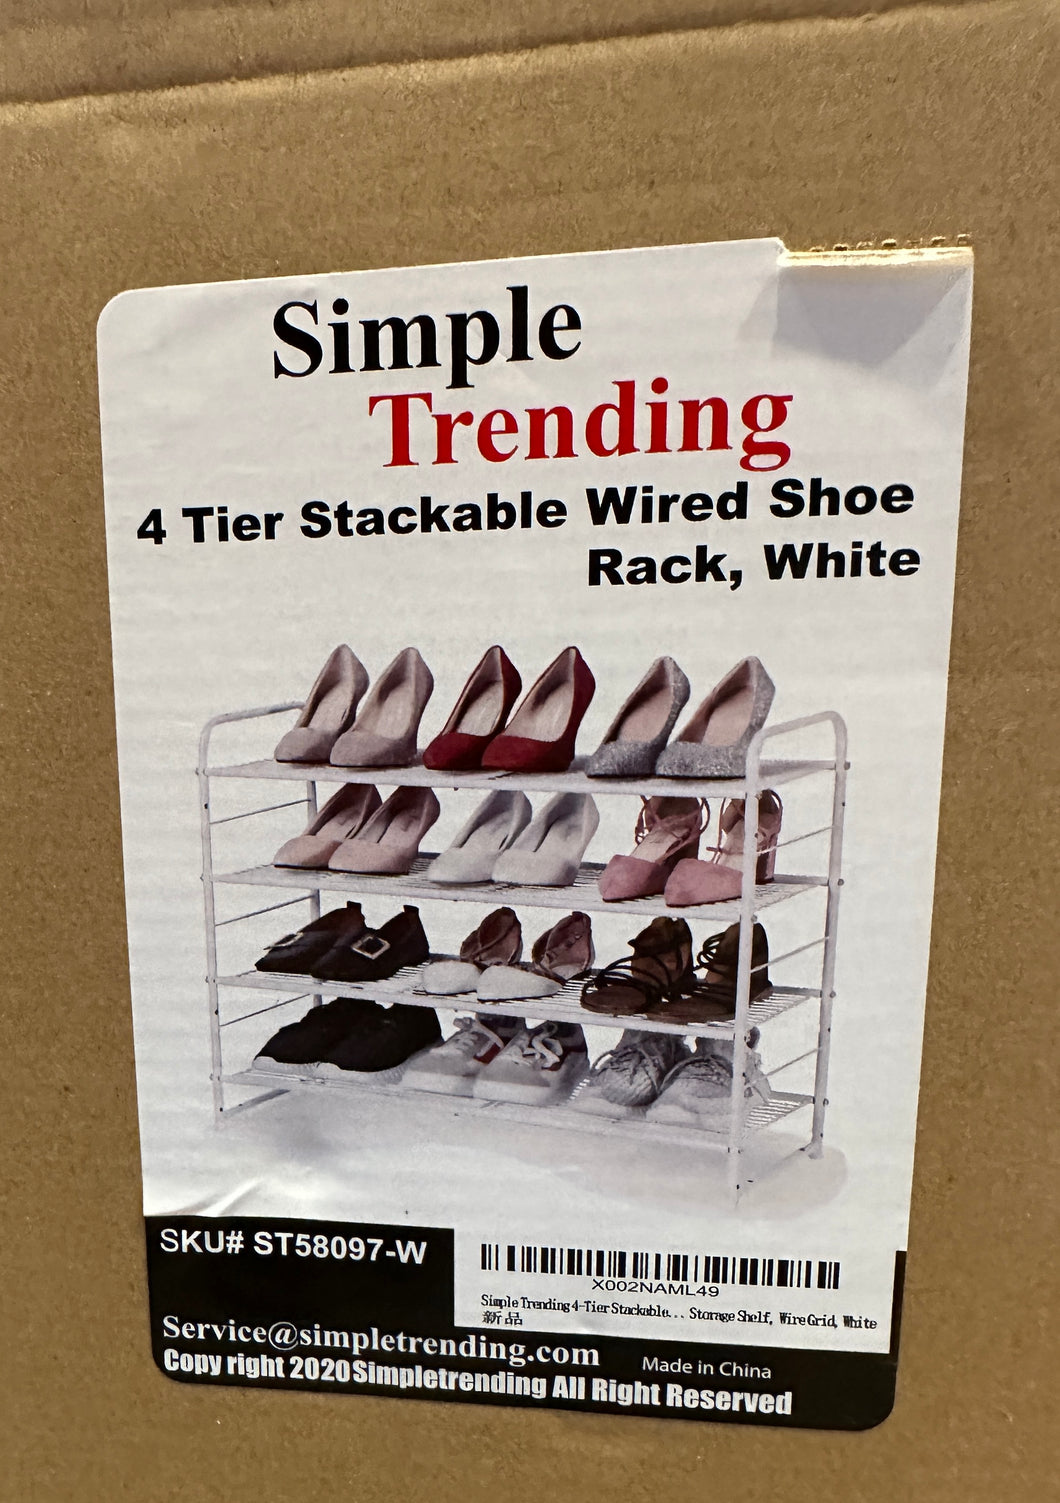 NWT - Simple Trending 4 tier stackable wired shoe rack - fits 16 pairs! One Size